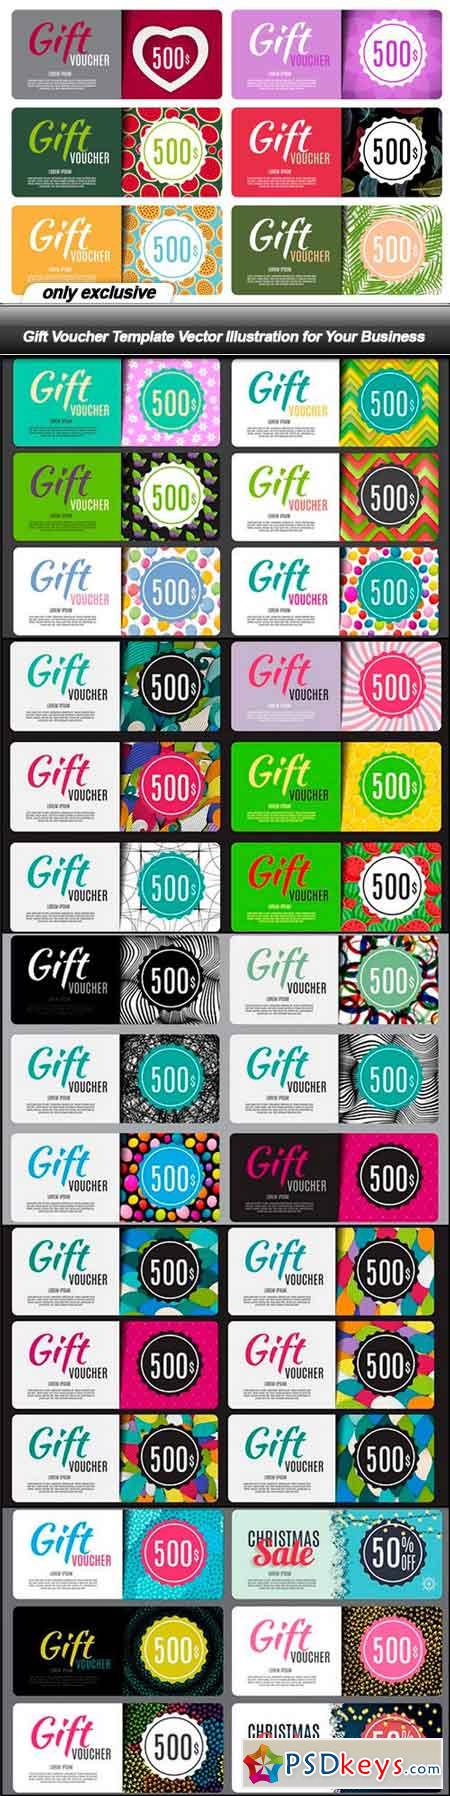 Gift Voucher Template Vector Illustration for Your Business - 6 EPS